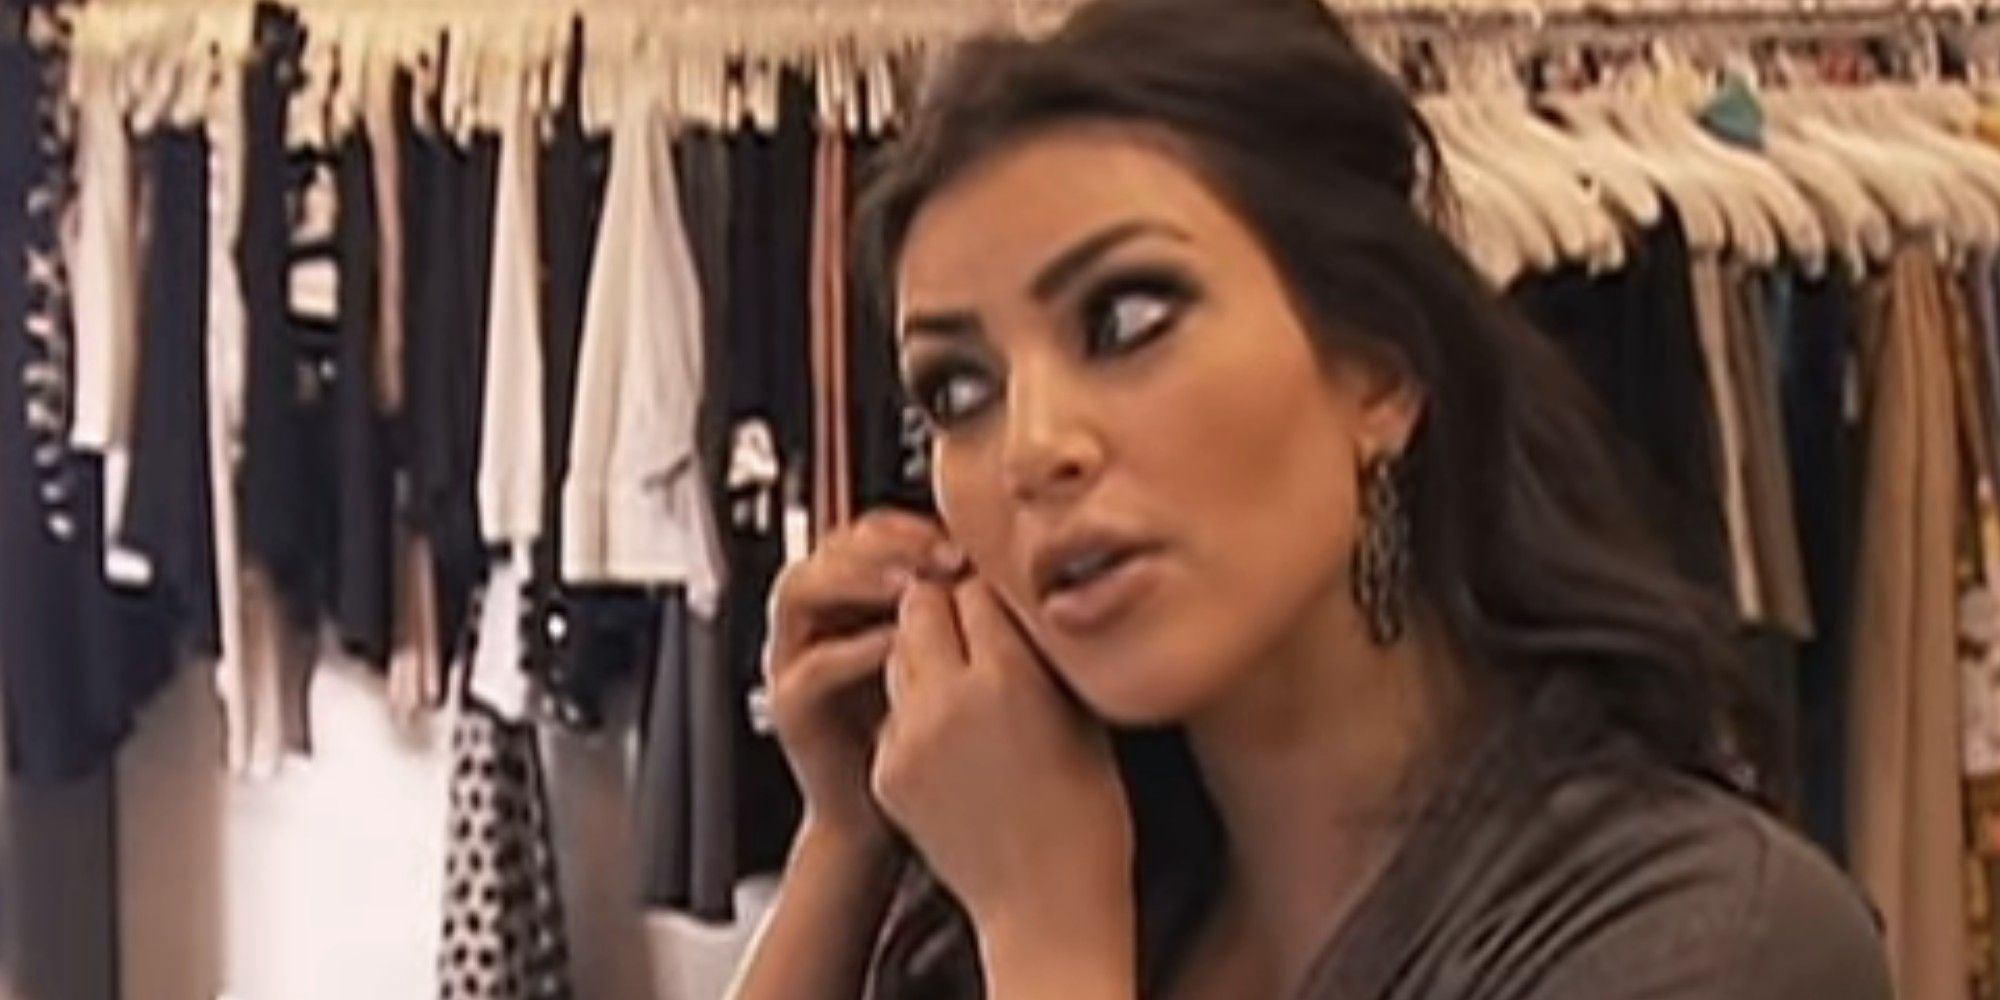 Kim Kardashian putting on earrings in her closet in a scene from Keeping Up with the Kardashians.